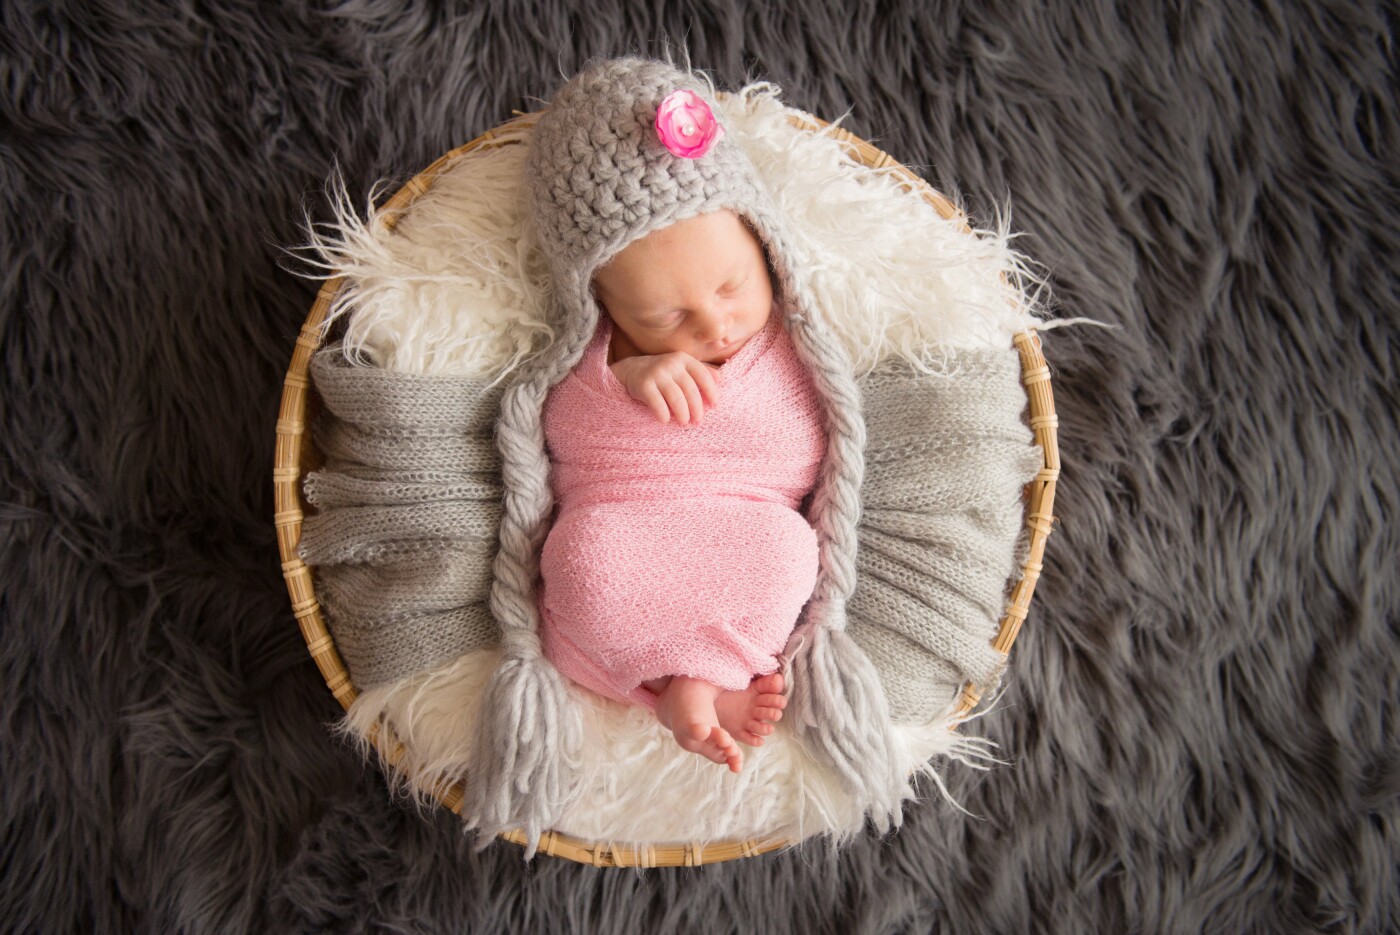 Meet newborn Kate Scarlett<br />
This beautiful girl was Born earlier and was so small.<br />
The shoot went great.<br />
Kate slept trough the whole photoshoot.<br />
This little girl stole my heart!